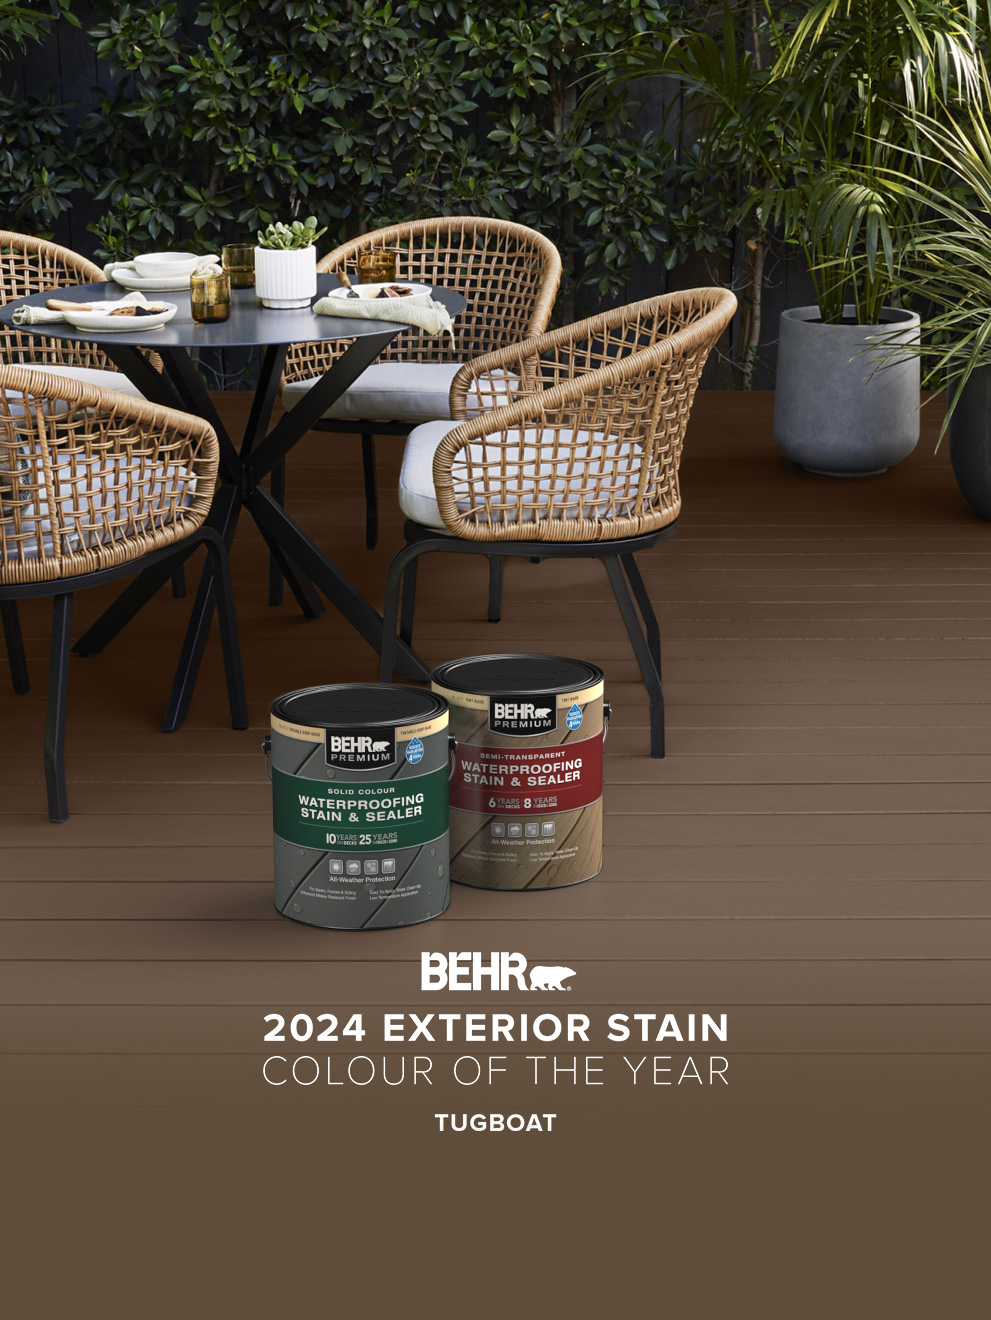 Mobile version of the BEHR 2024 Exterior Colour of the Year - Tugboat